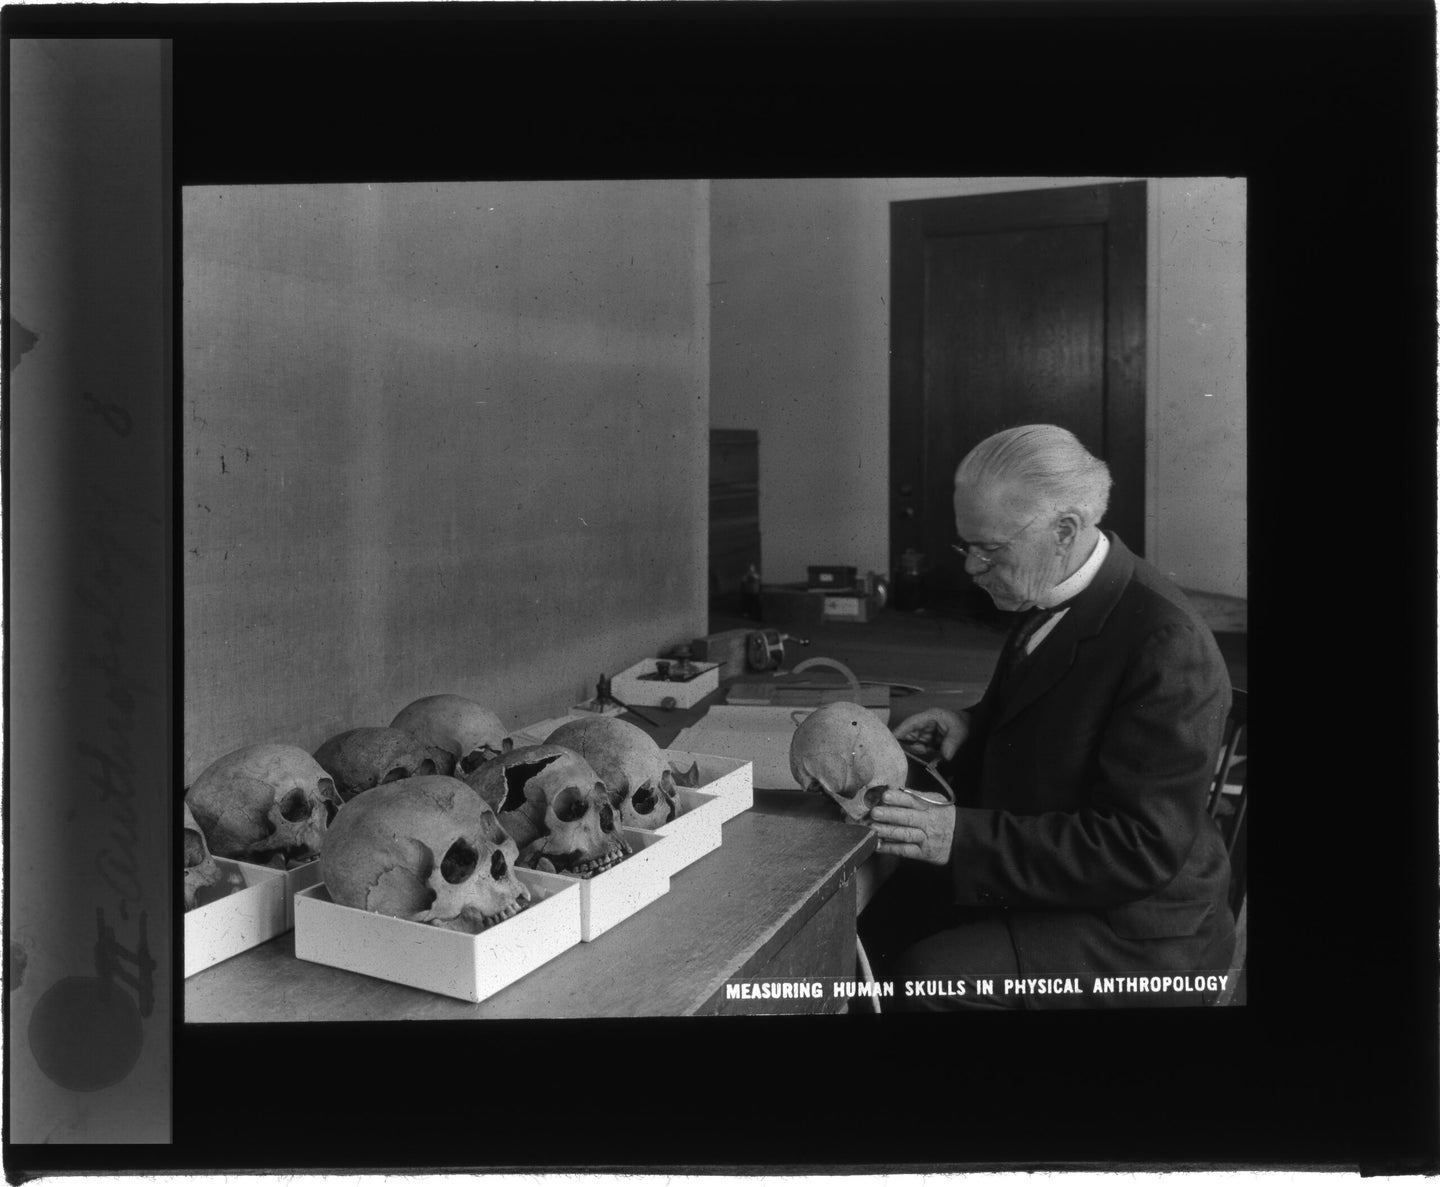 Aleš Hrdlička, a founding bioanthropologist, measuring skulls in what is now the National Museum of Natural History.